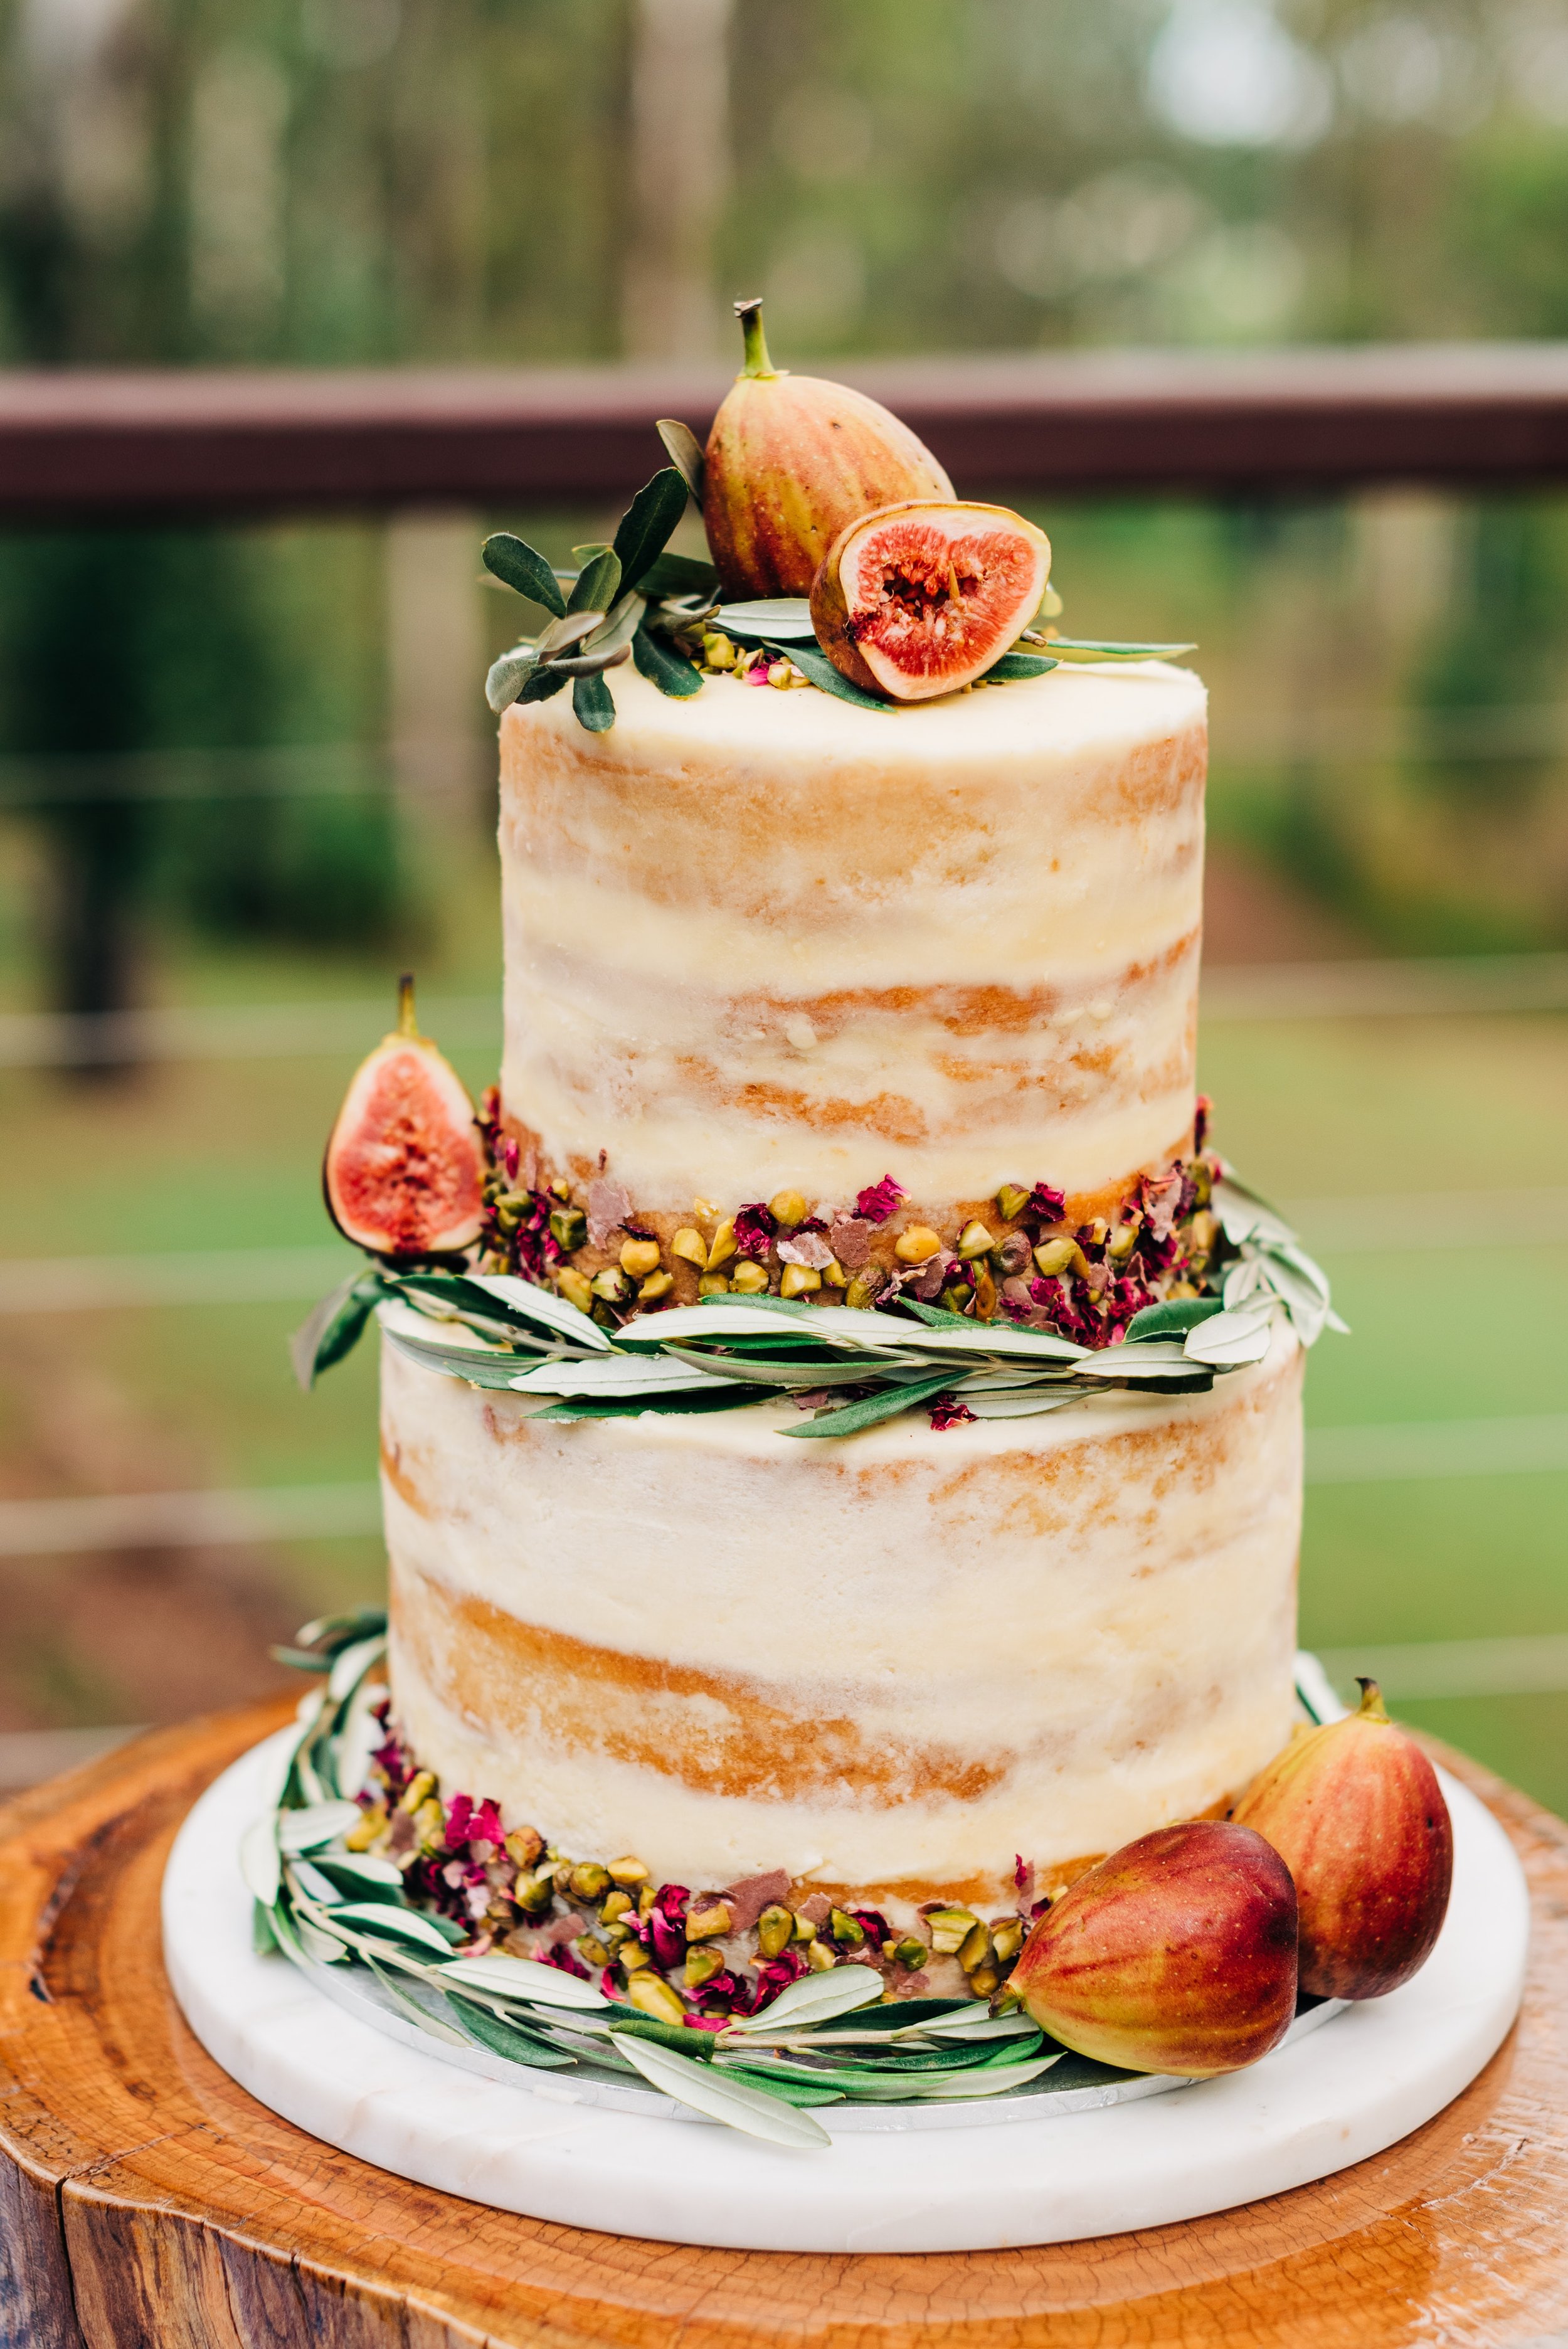 Creative Wedding Cake Flavors Your Guests Have Never Seen